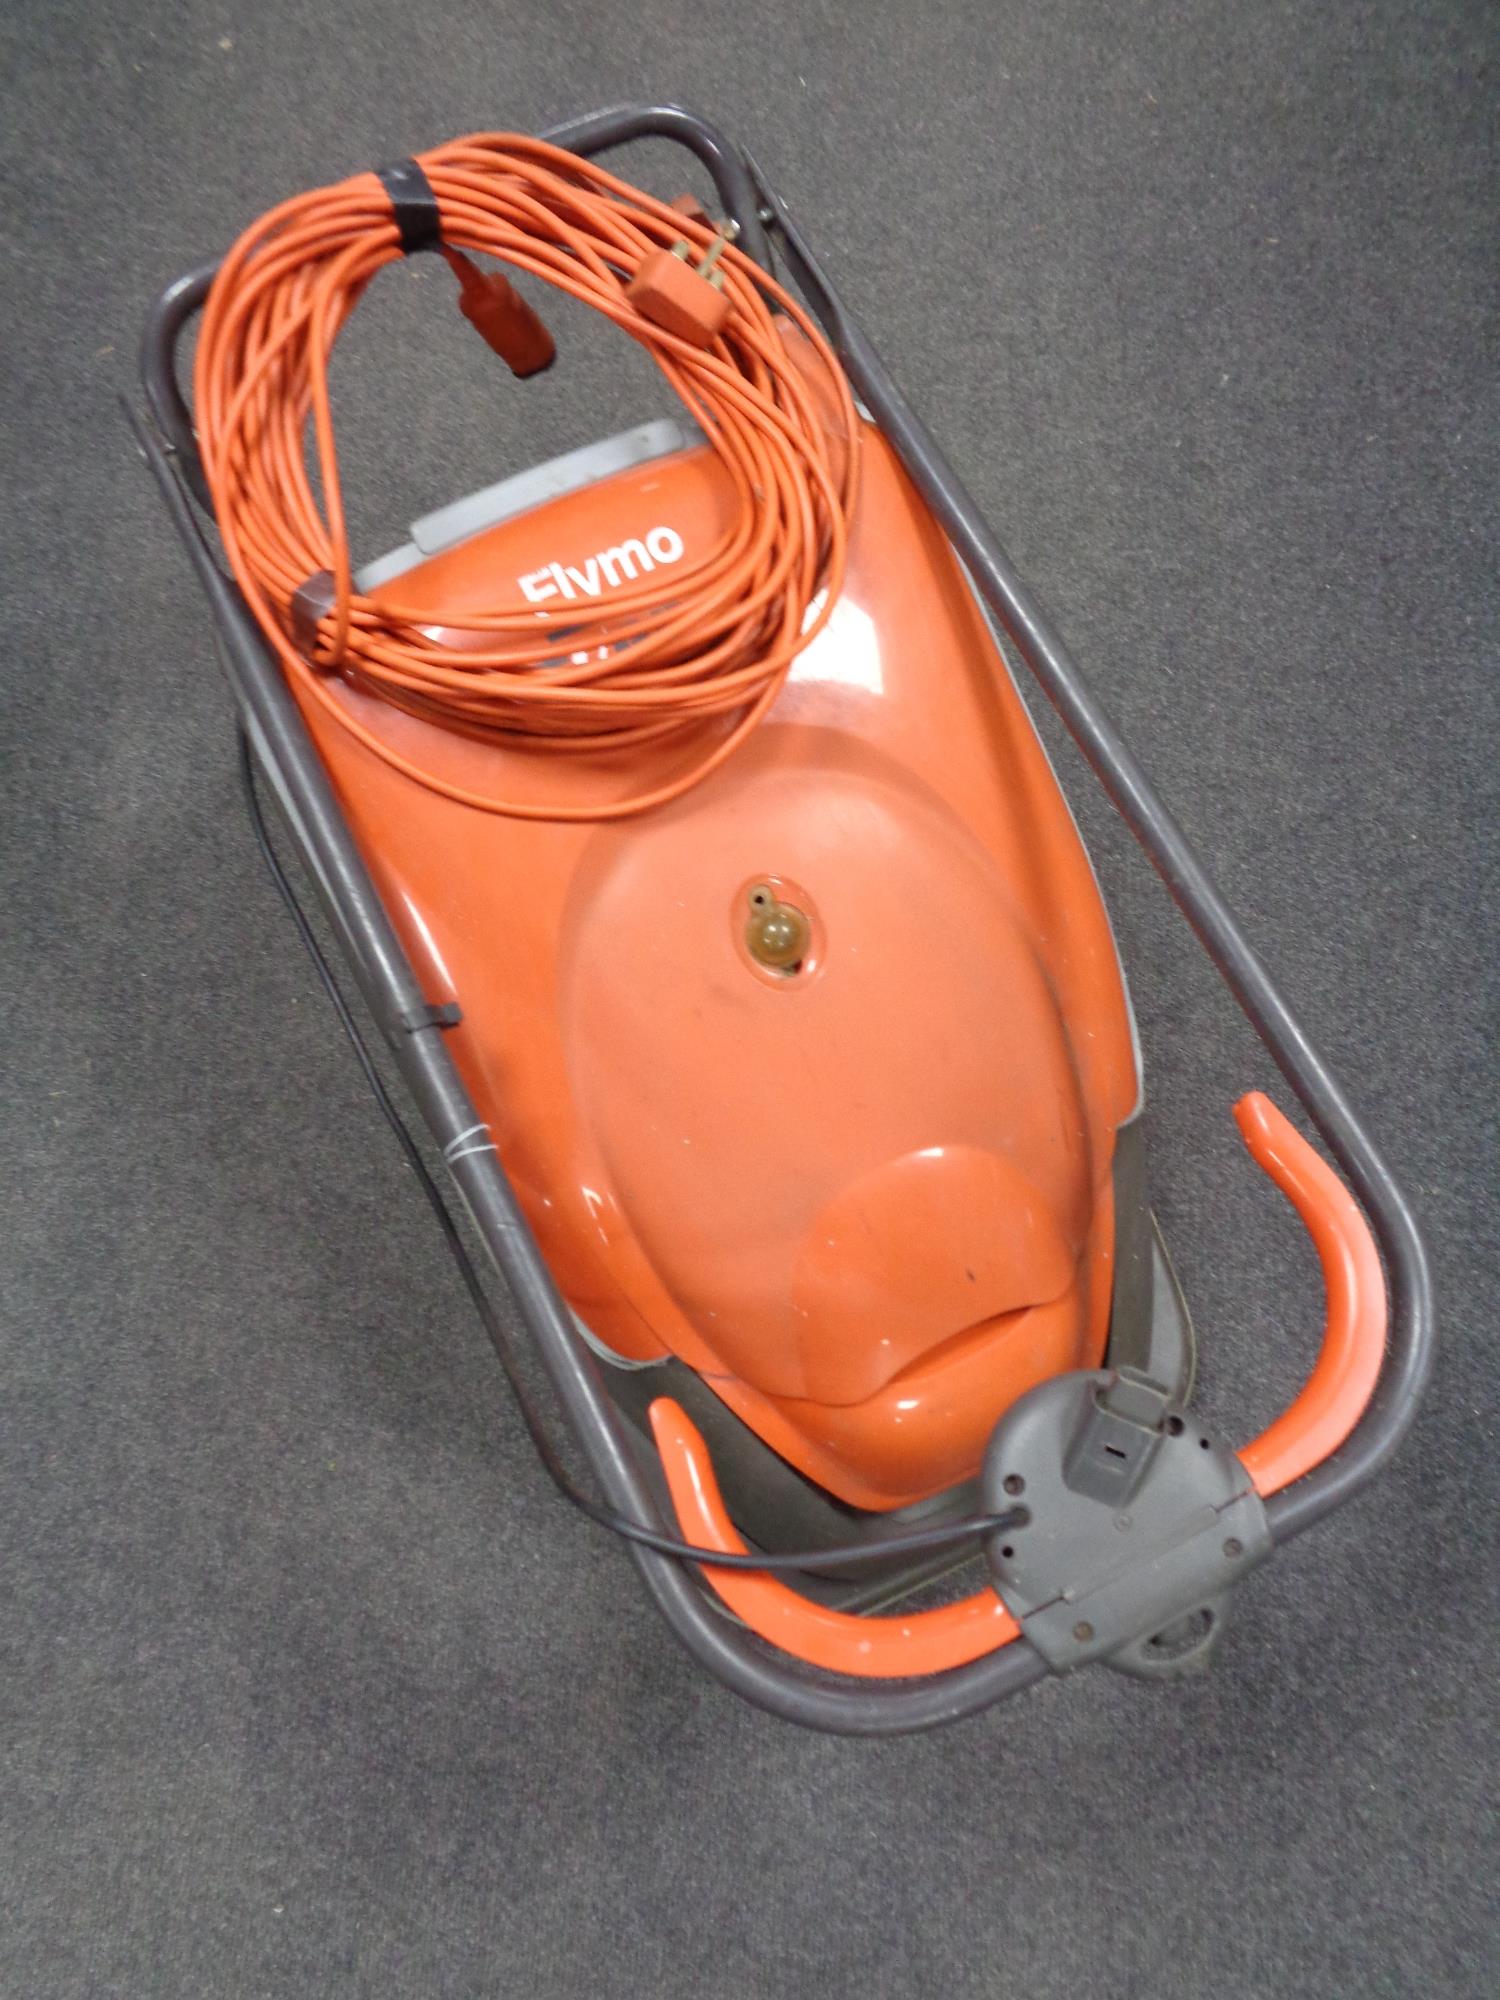 A Flymo Turbo Compact 380 lawn mower with lead.